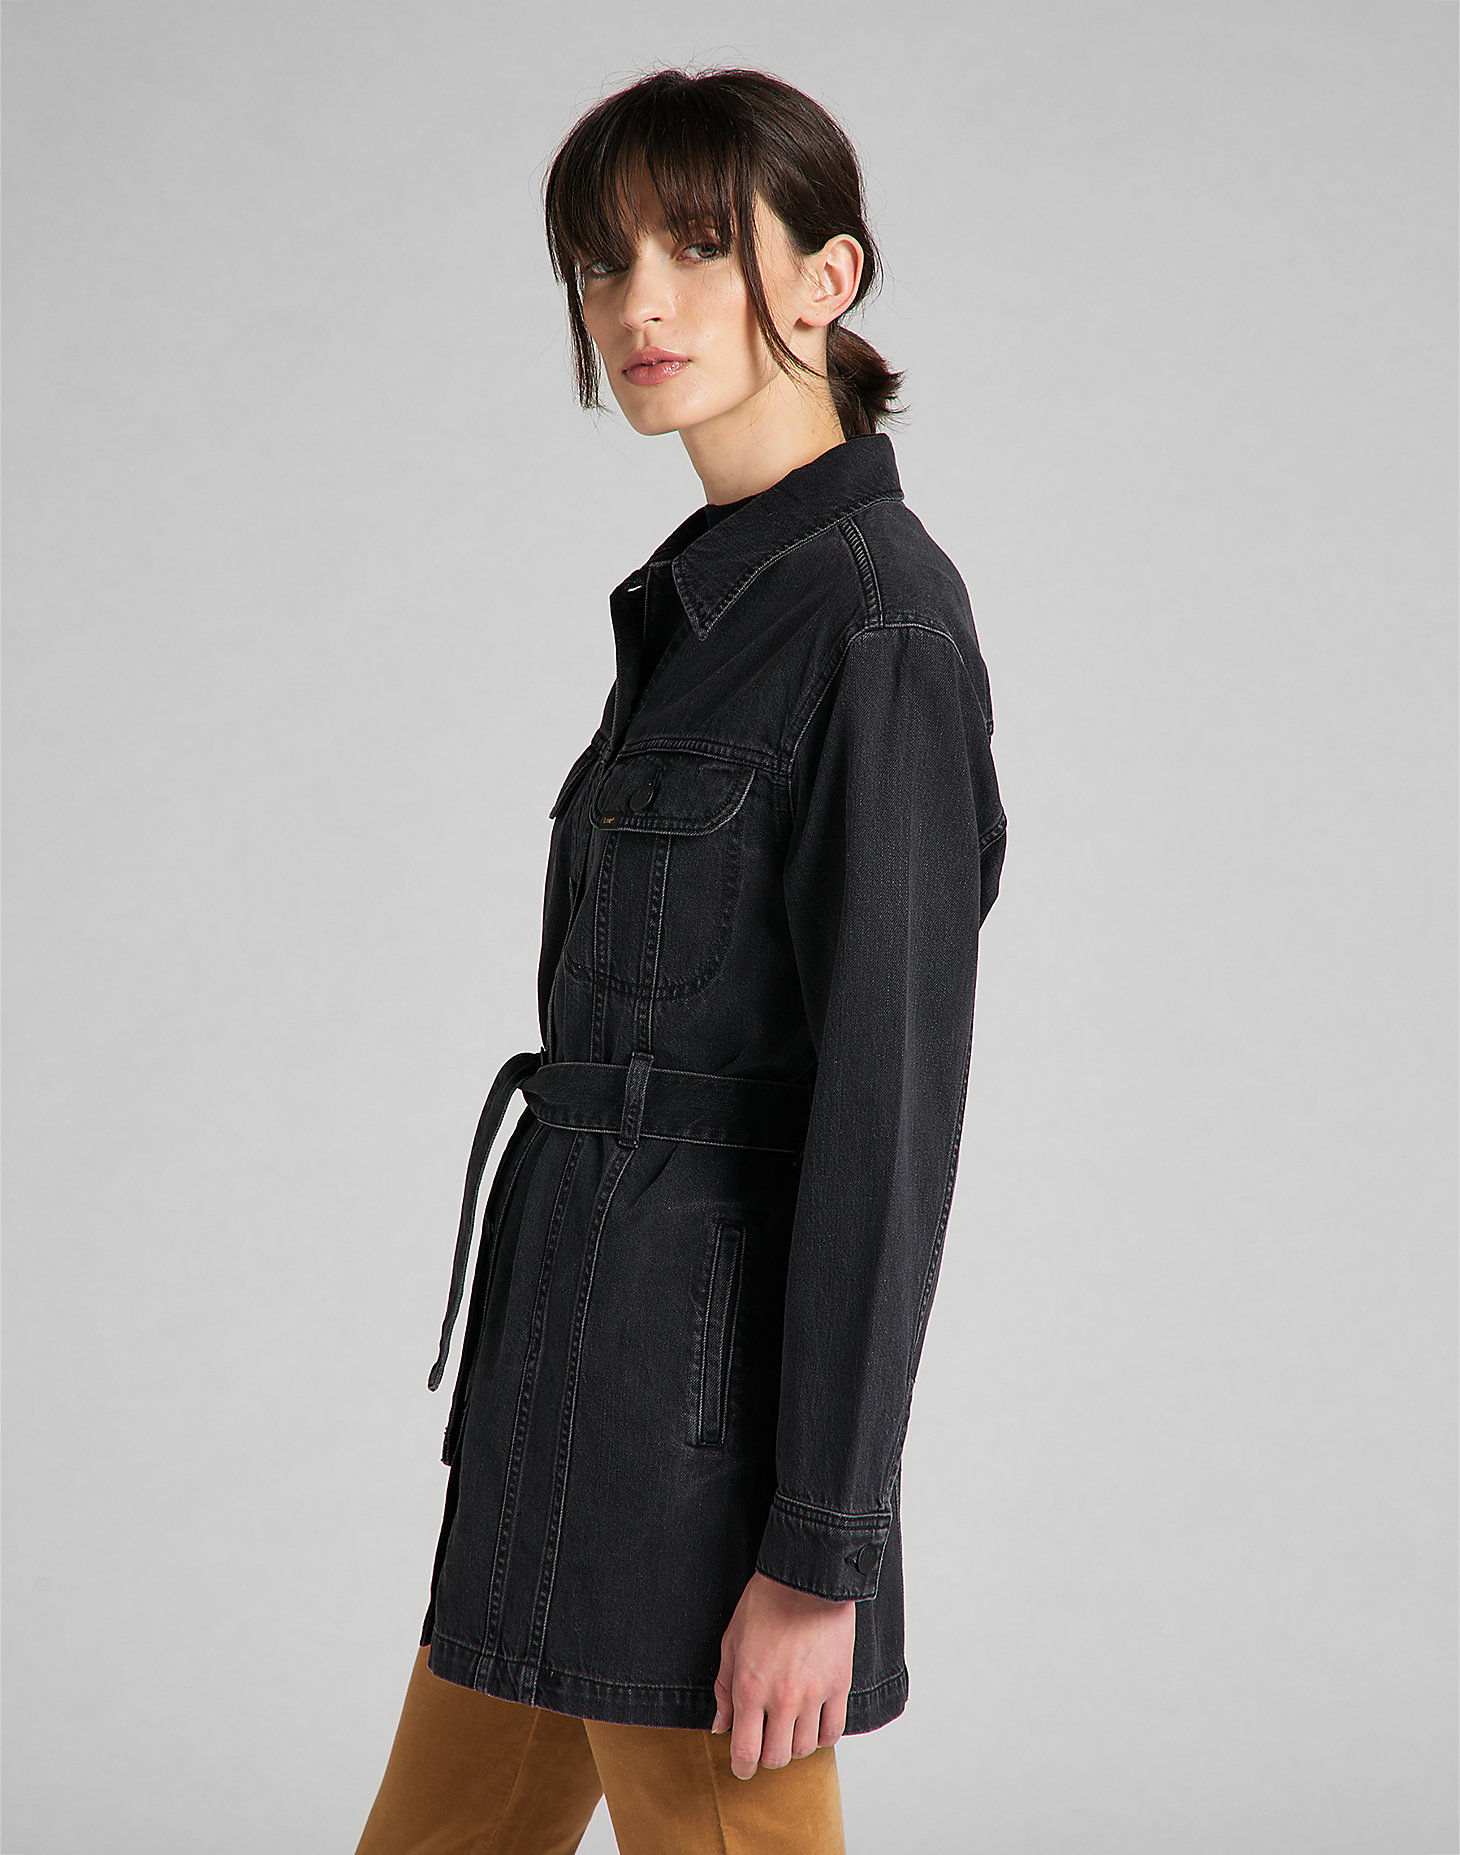 Belted Rider Jacket in Black Duns alternative view 3